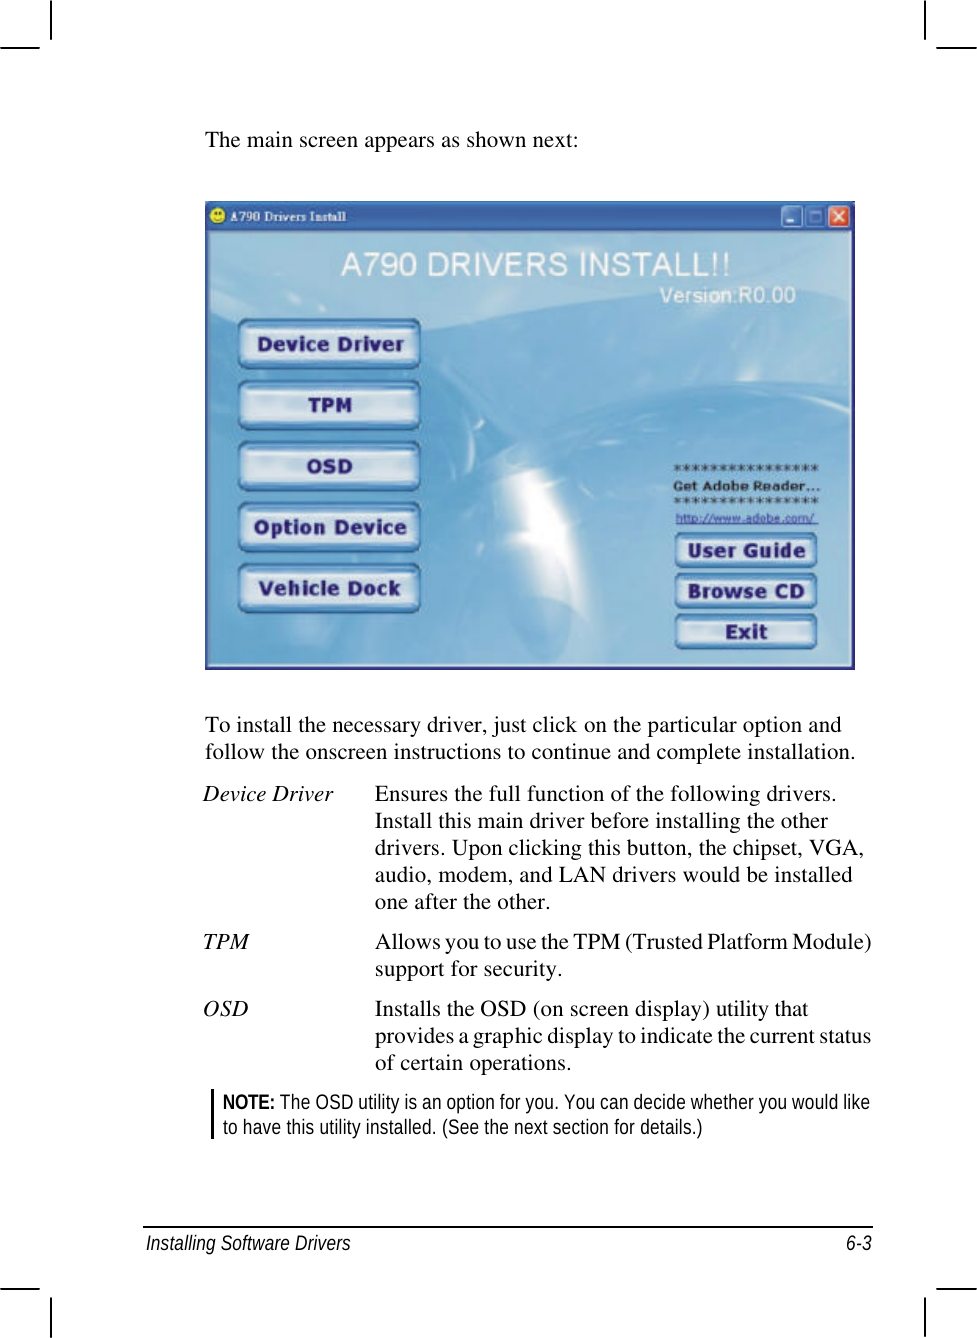  Installing Software Drivers 6-3 The main screen appears as shown next:  To install the necessary driver, just click on the particular option and follow the onscreen instructions to continue and complete installation. Device Driver Ensures the full function of the following drivers. Install this main driver before installing the other drivers. Upon clicking this button, the chipset, VGA, audio, modem, and LAN drivers would be installed one after the other. TPM Allows you to use the TPM (Trusted Platform Module) support for security. OSD Installs the OSD (on screen display) utility that provides a graphic display to indicate the current status of certain operations. NOTE: The OSD utility is an option for you. You can decide whether you would like to have this utility installed. (See the next section for details.)  